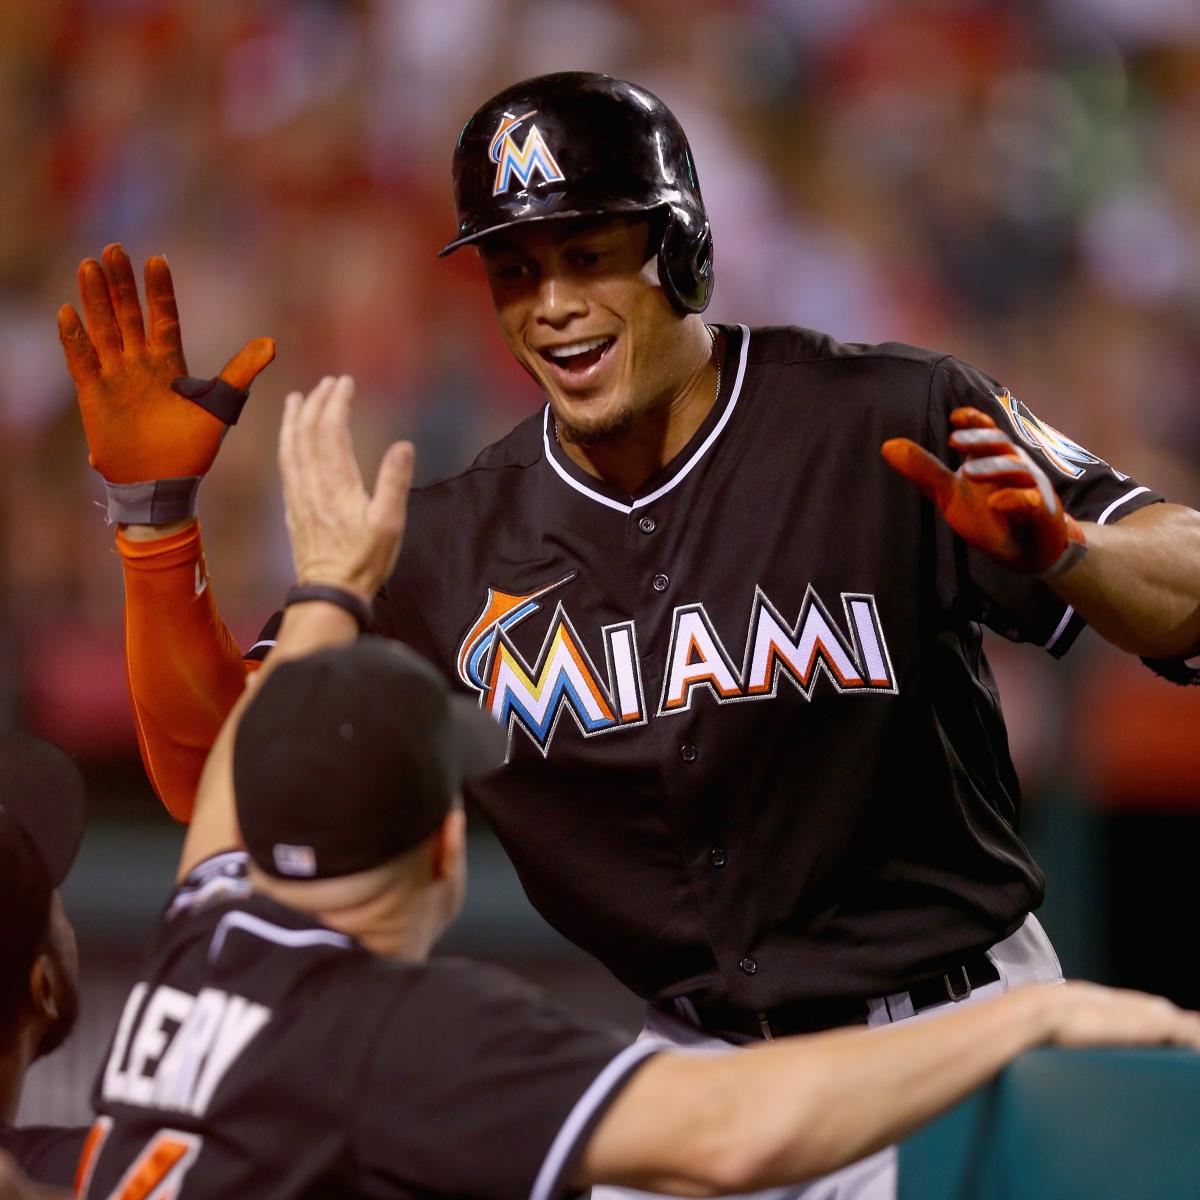 Marlins outfielder Giancarlo Stanton heads to disabled list - ABC7